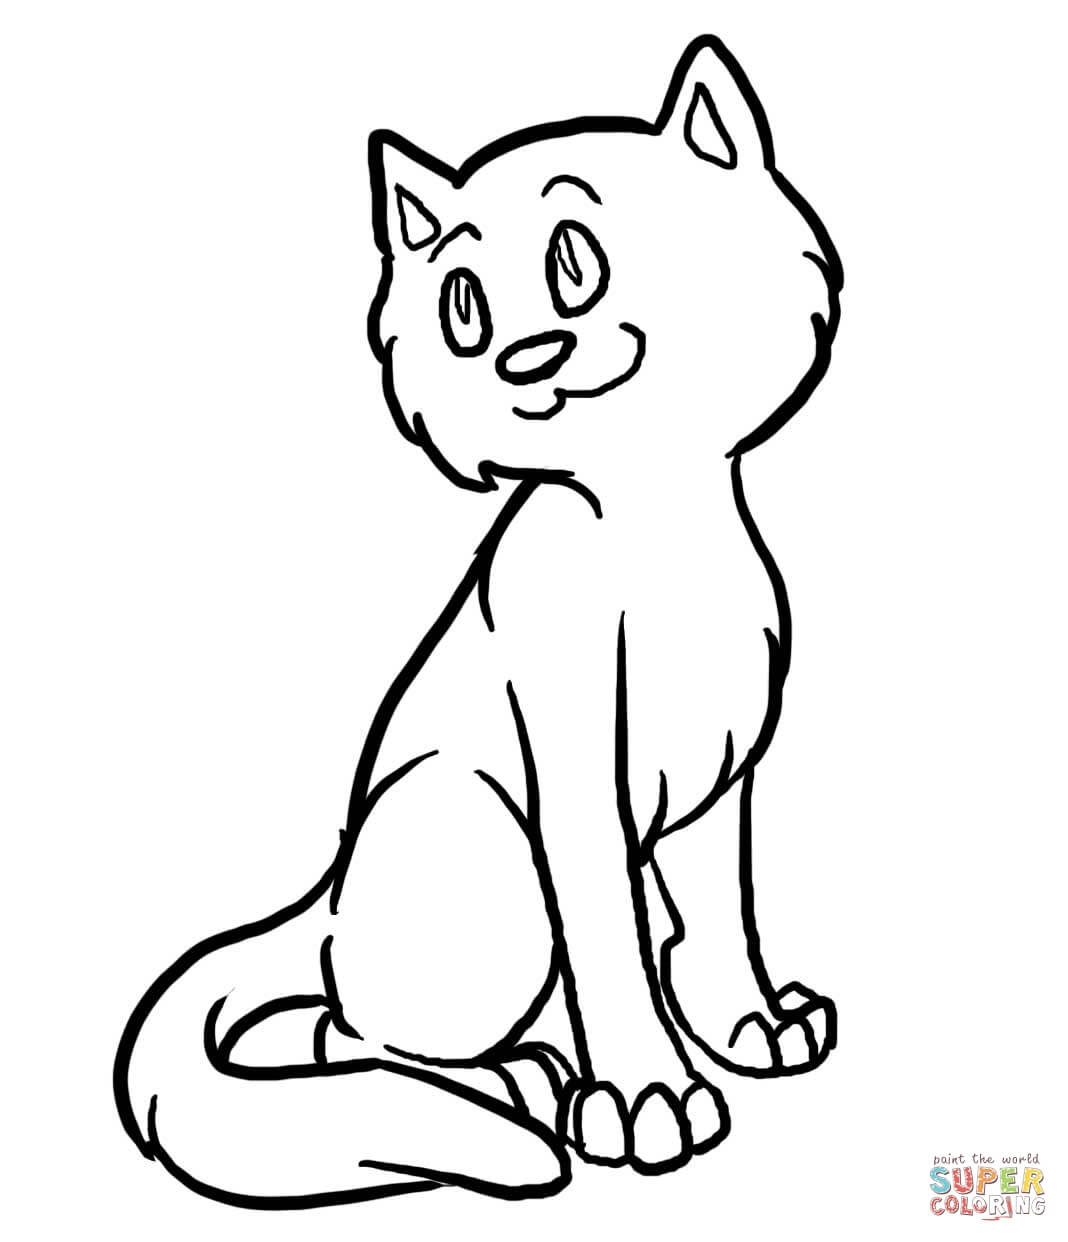 Lovely Cartoon Cat coloring page Free Printable Coloring